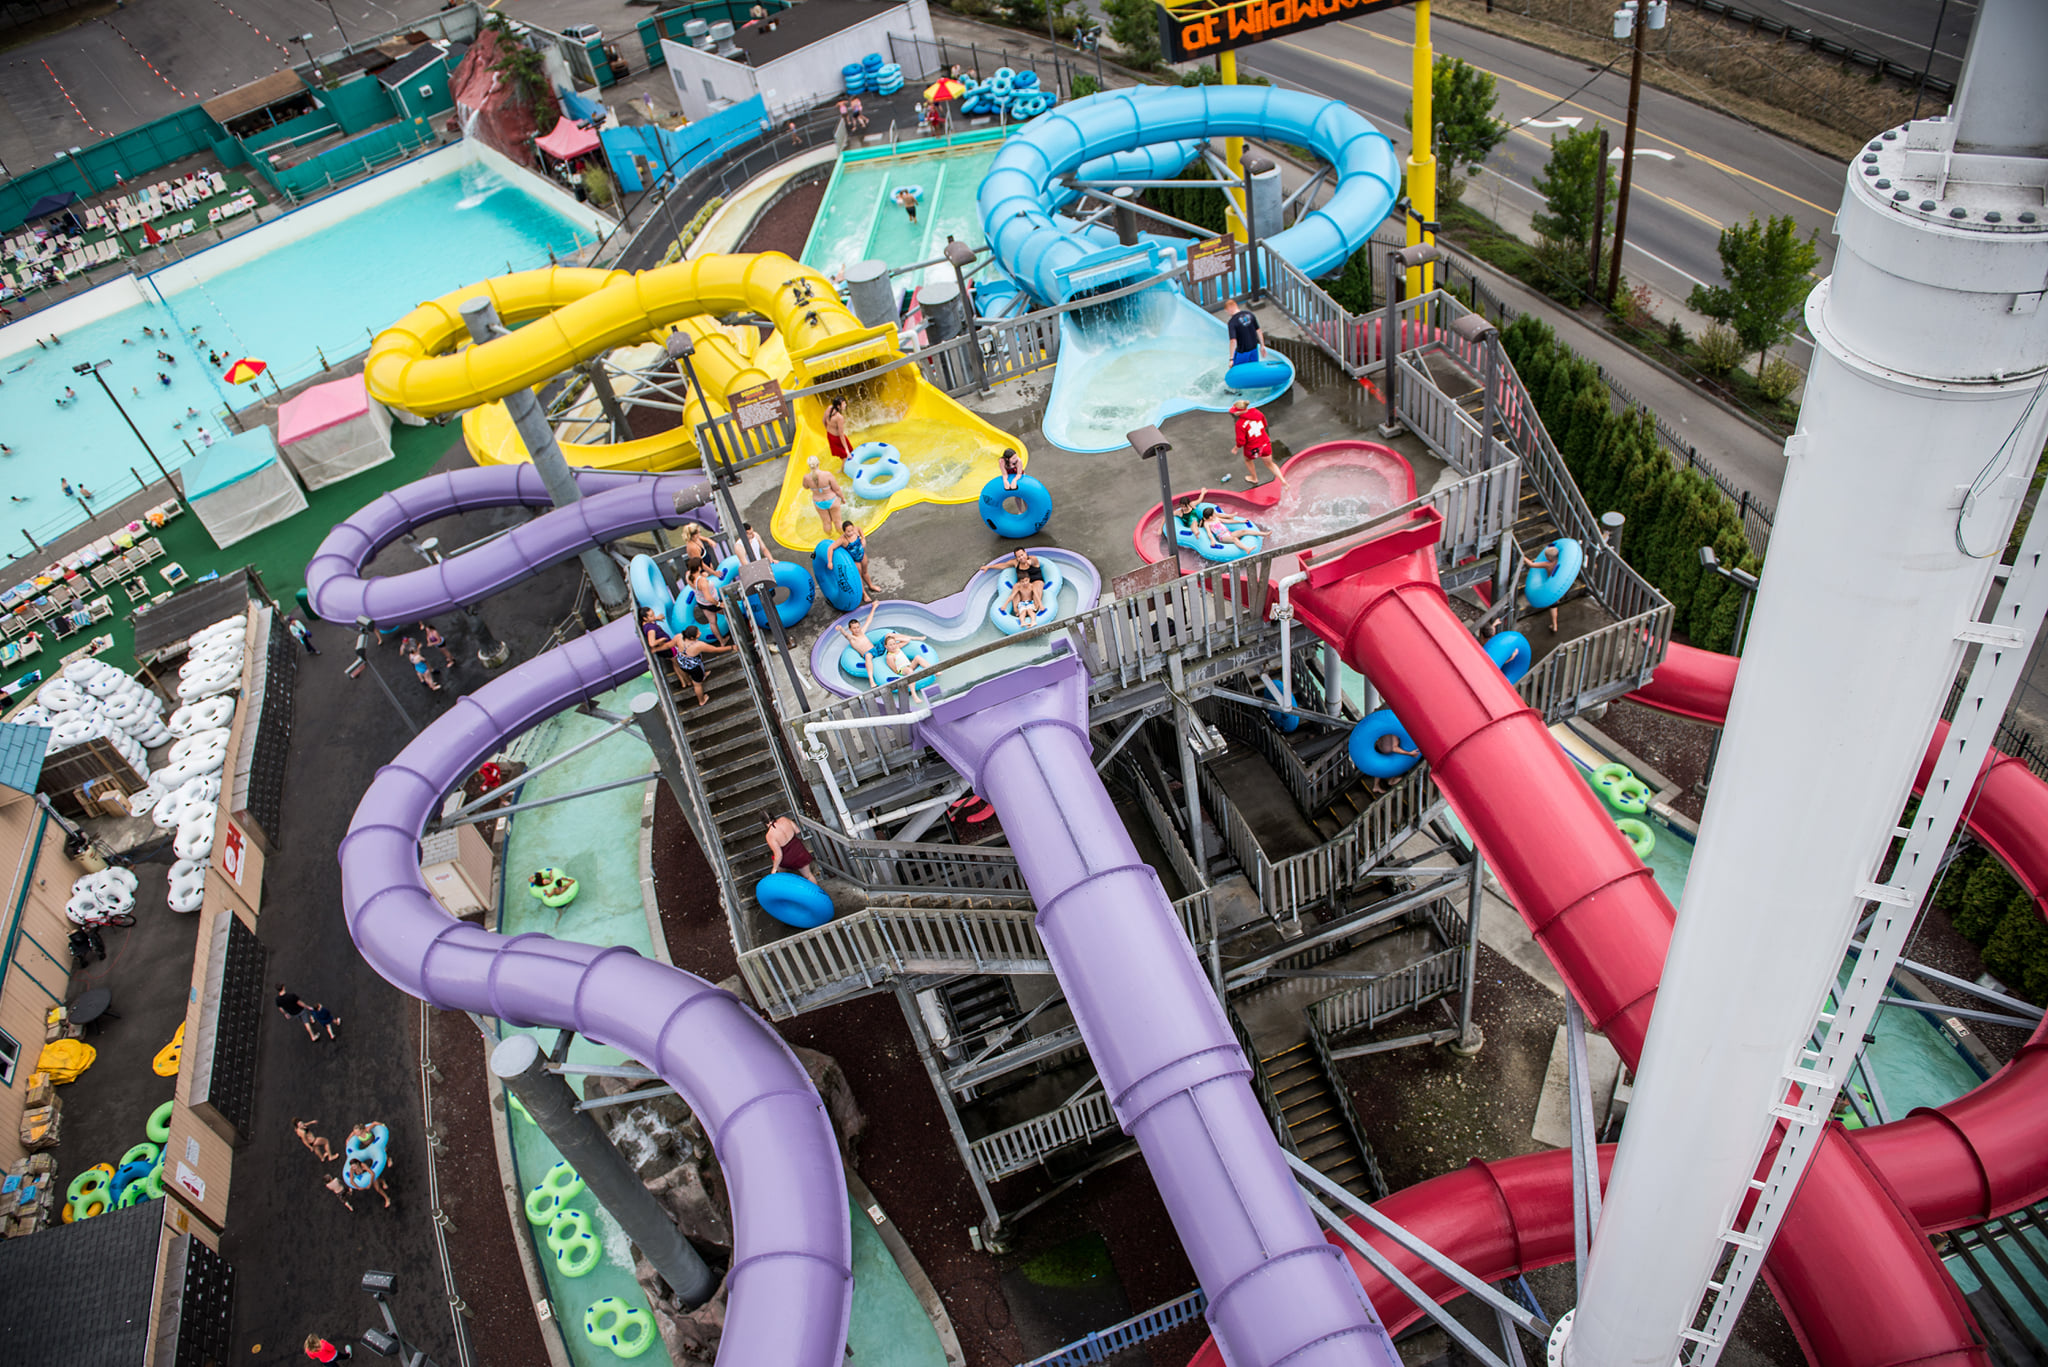 Theme Parks and Water Parks in Washington State